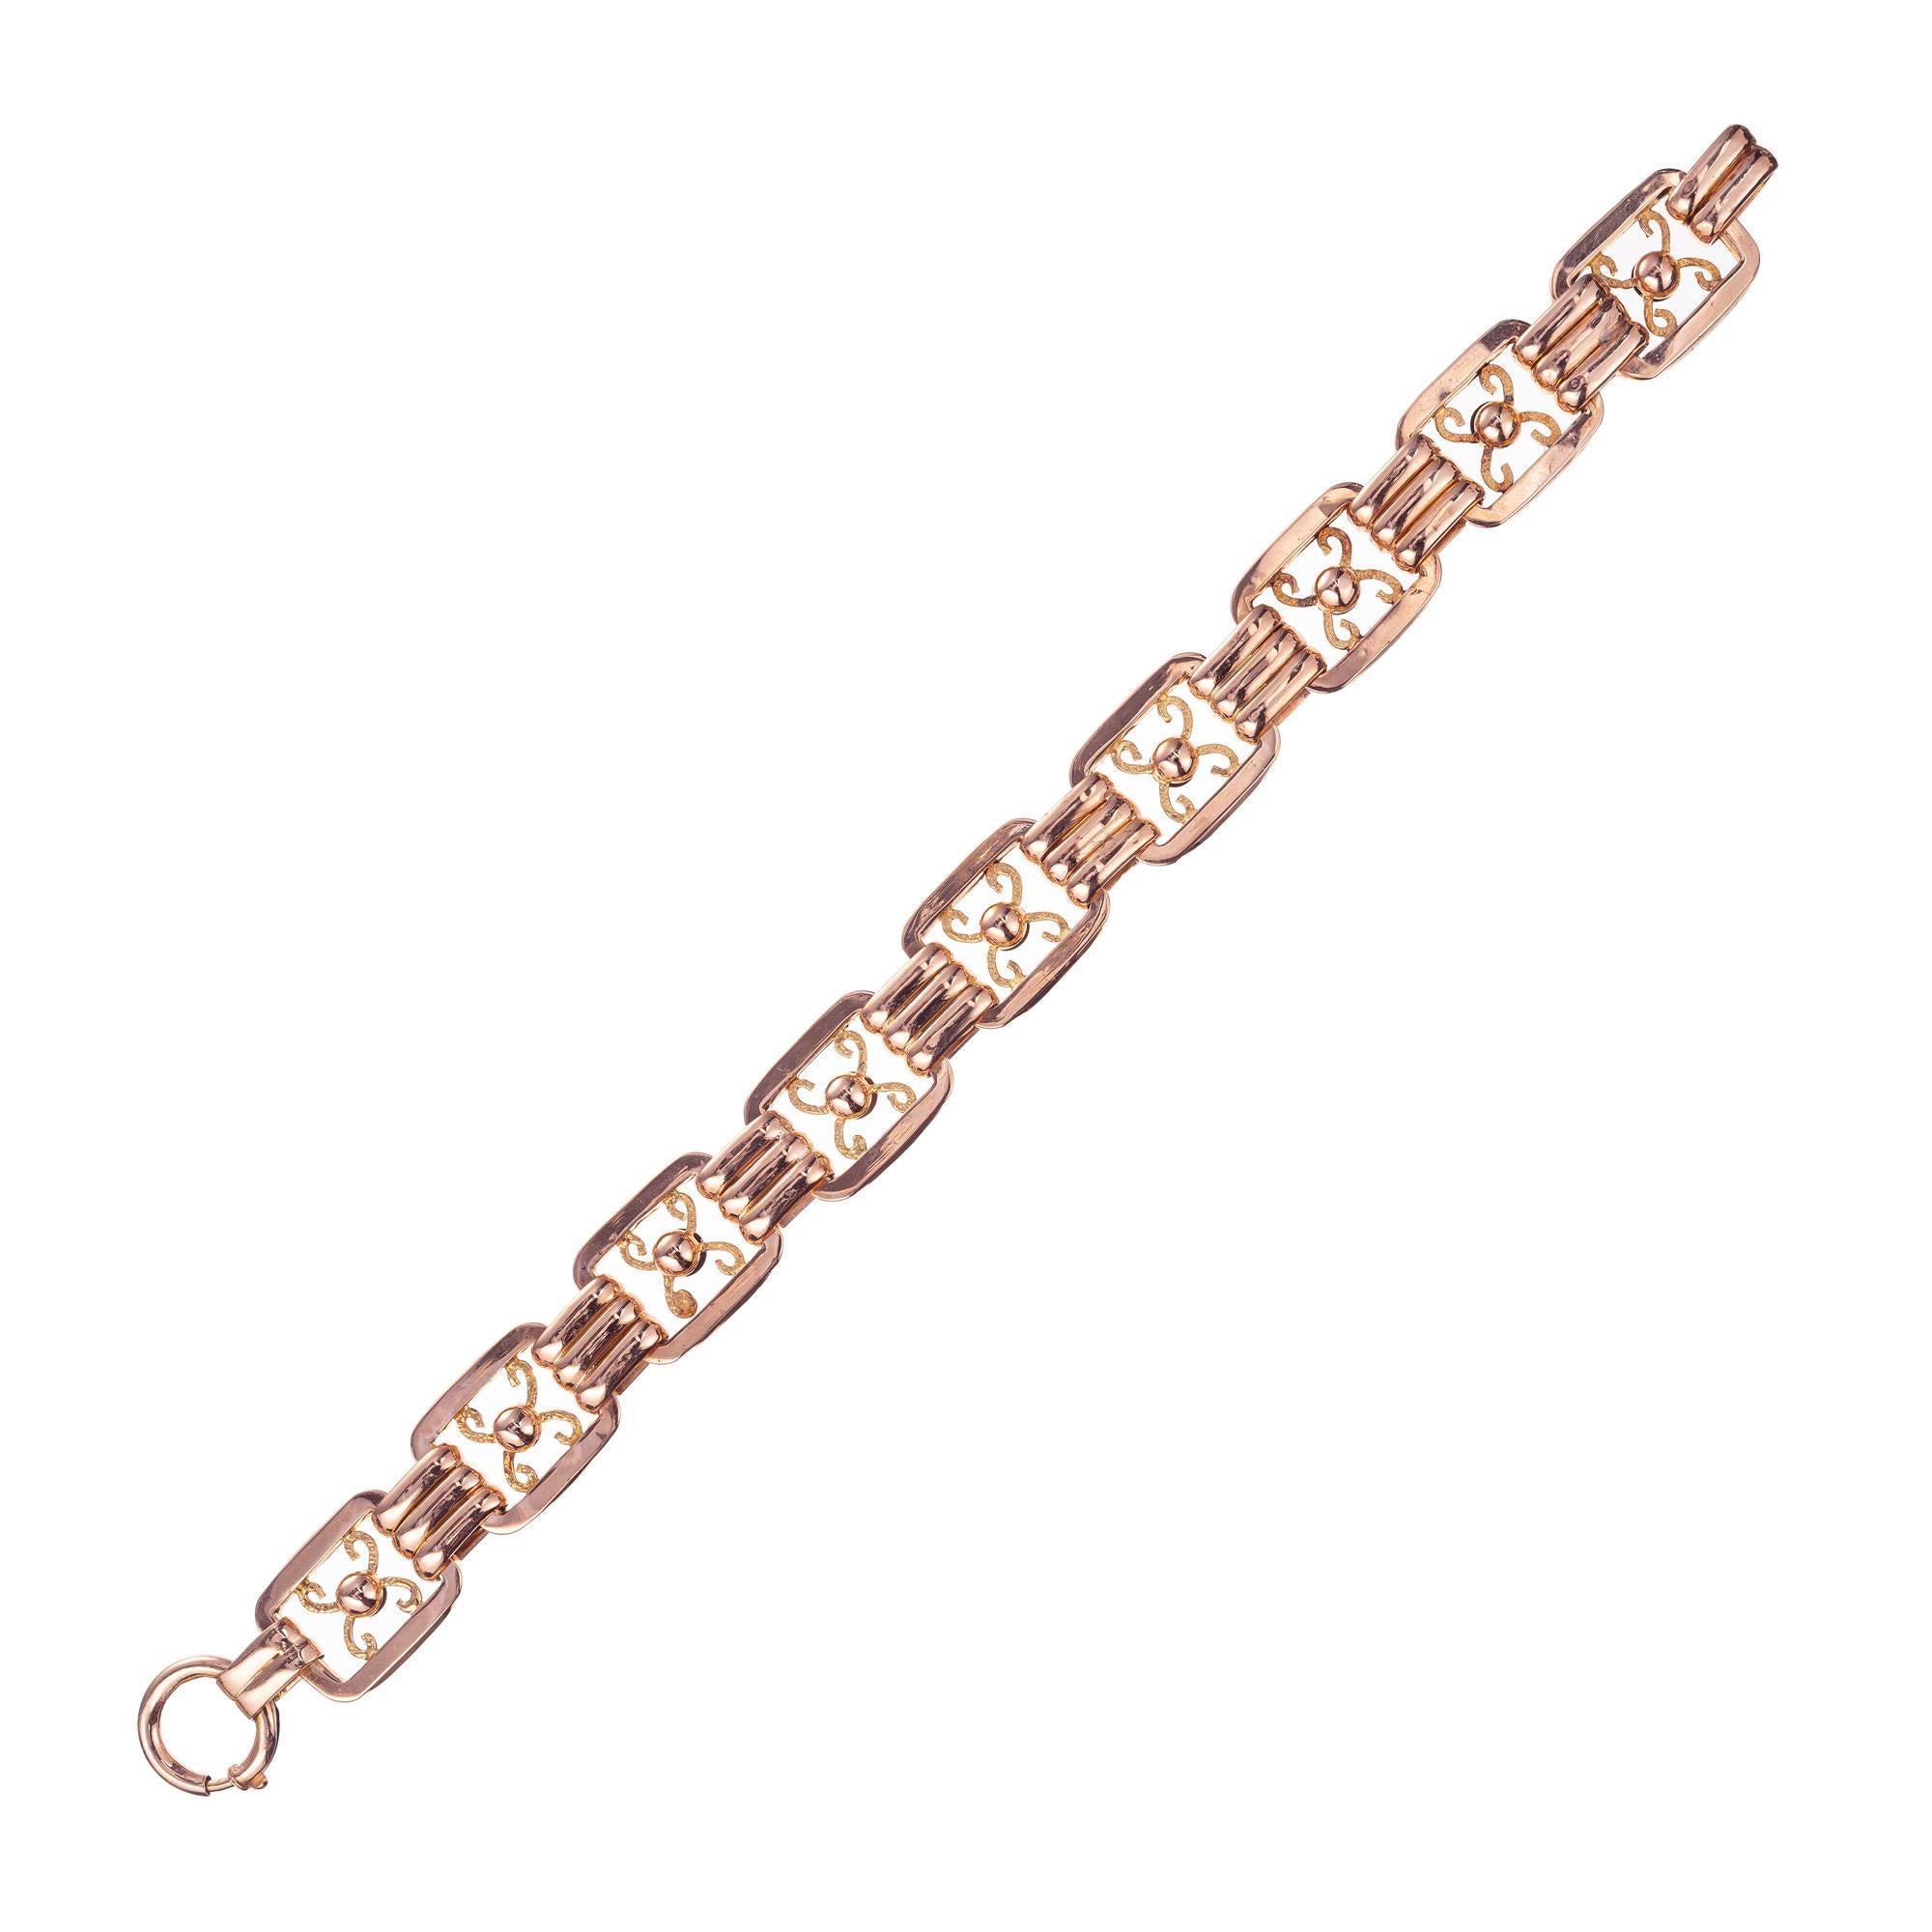 Rose Gold Handmade Rectangular Link Bracelet  In Good Condition For Sale In Stamford, CT